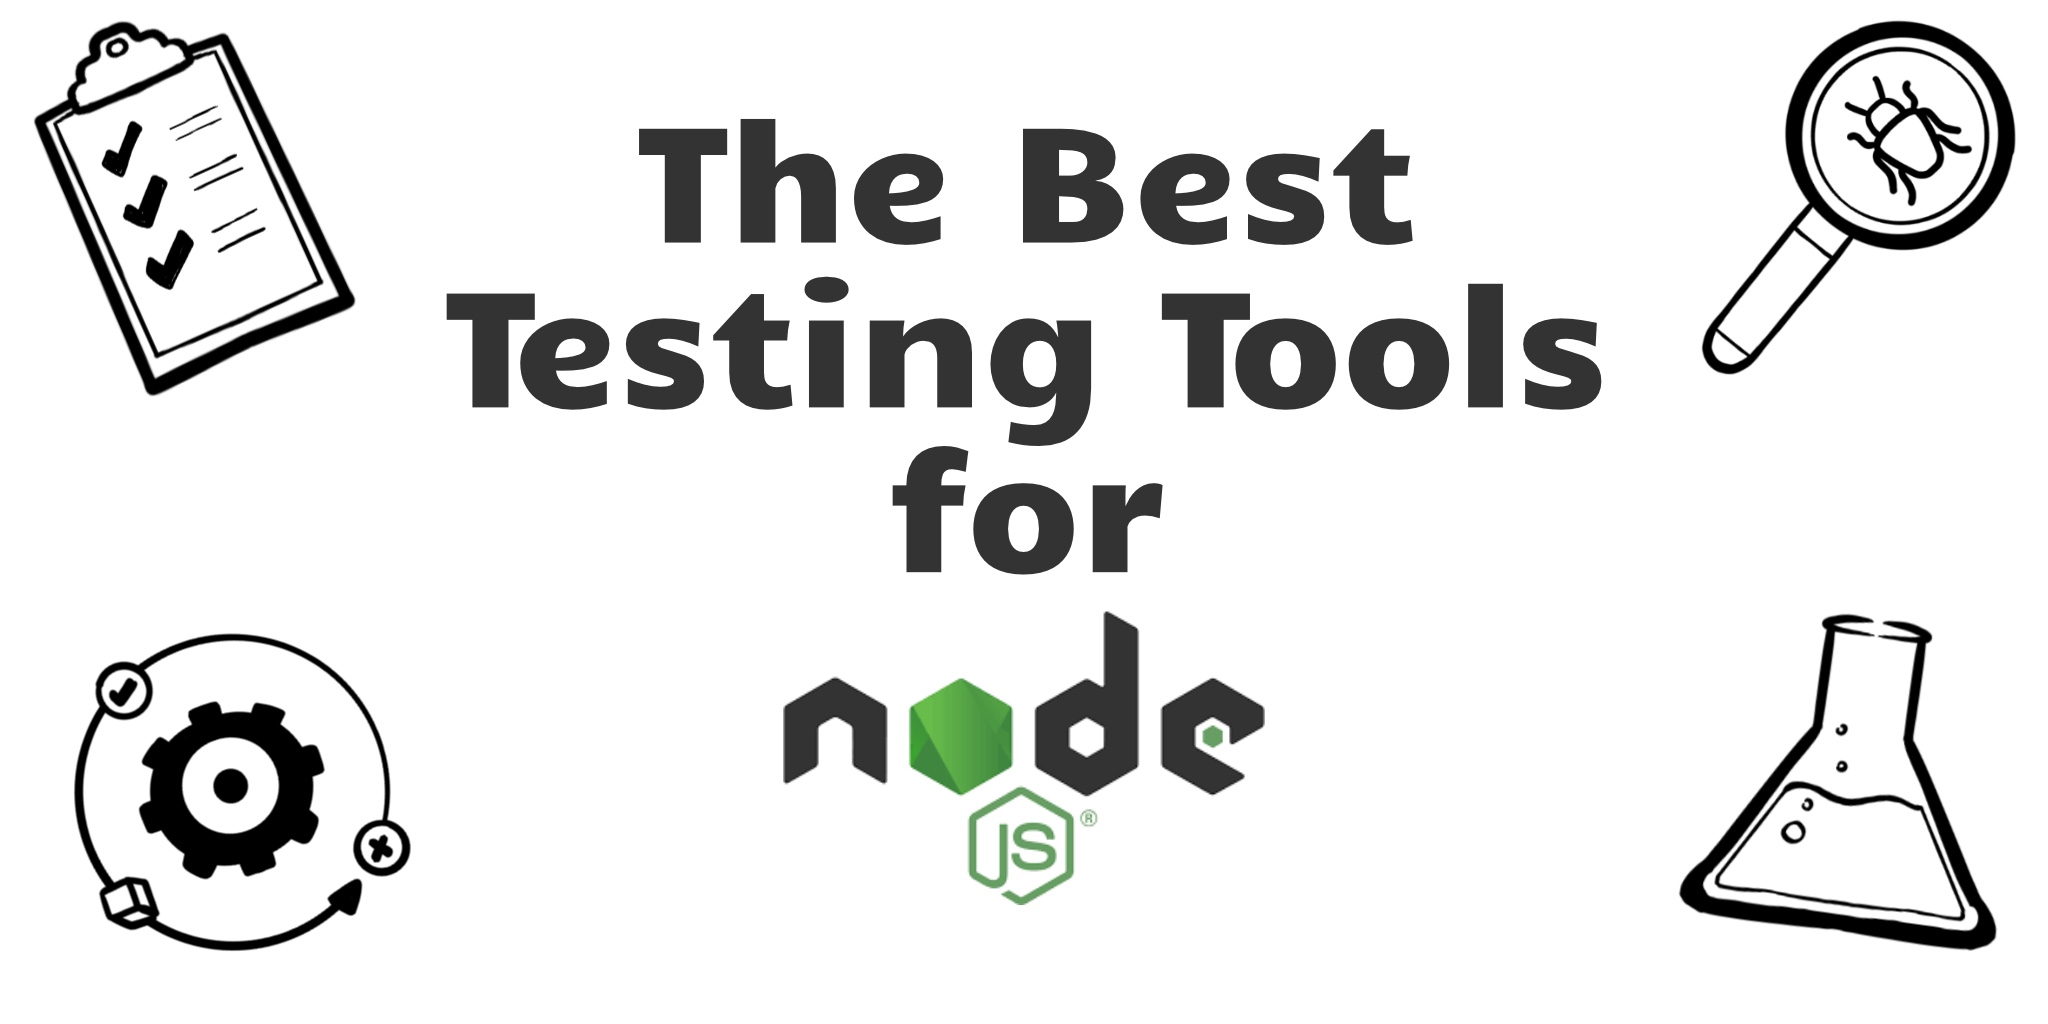 The Best Testing Tools for Node.js